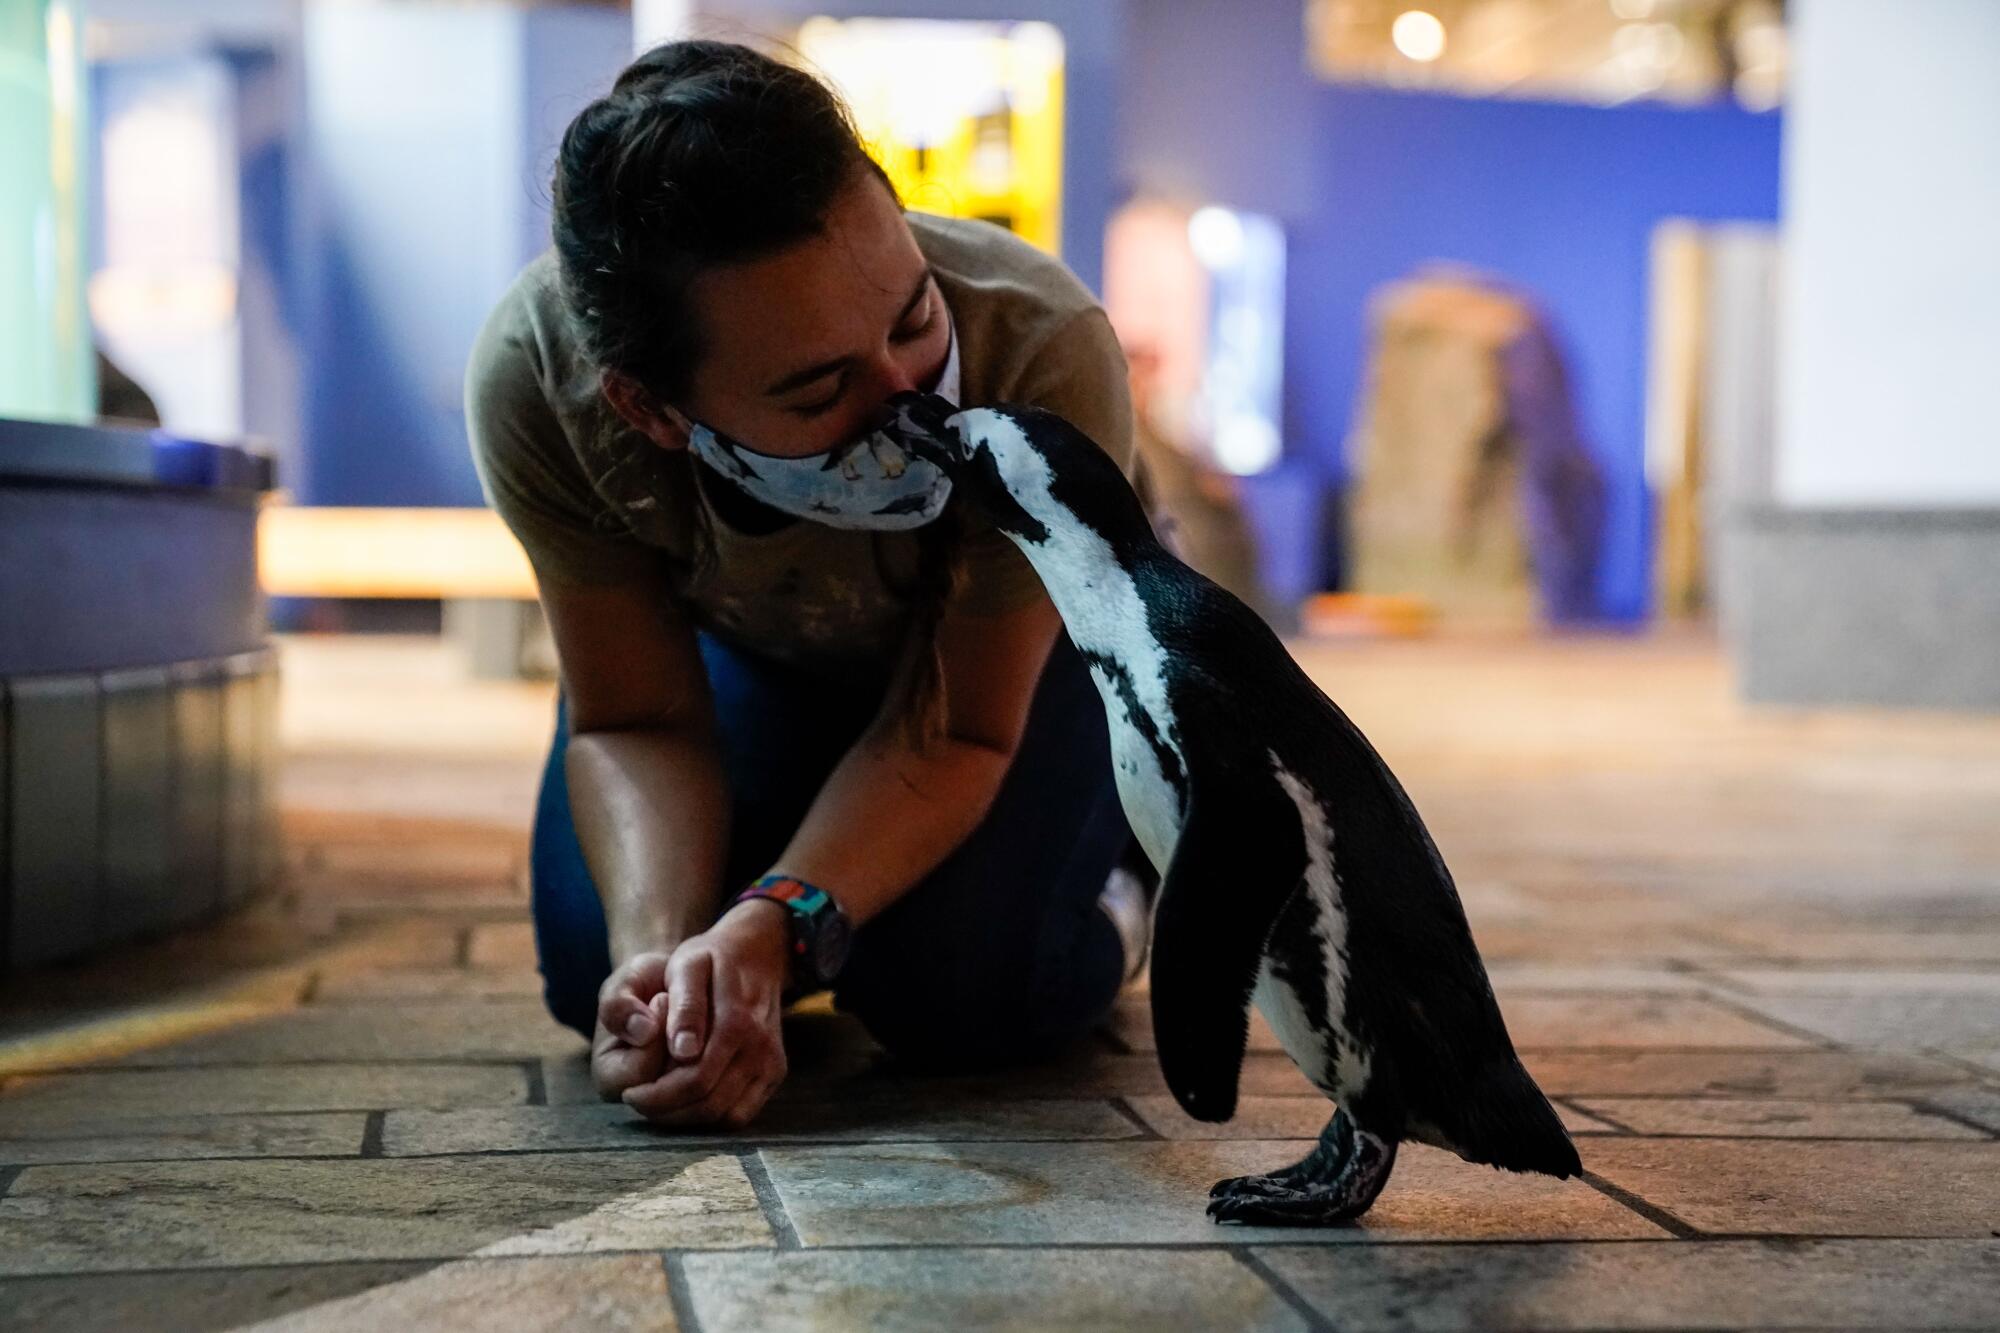 Rey, a penguin, taking a stroll outside of the penguin enclosure at the Monterey Bay Aquarium